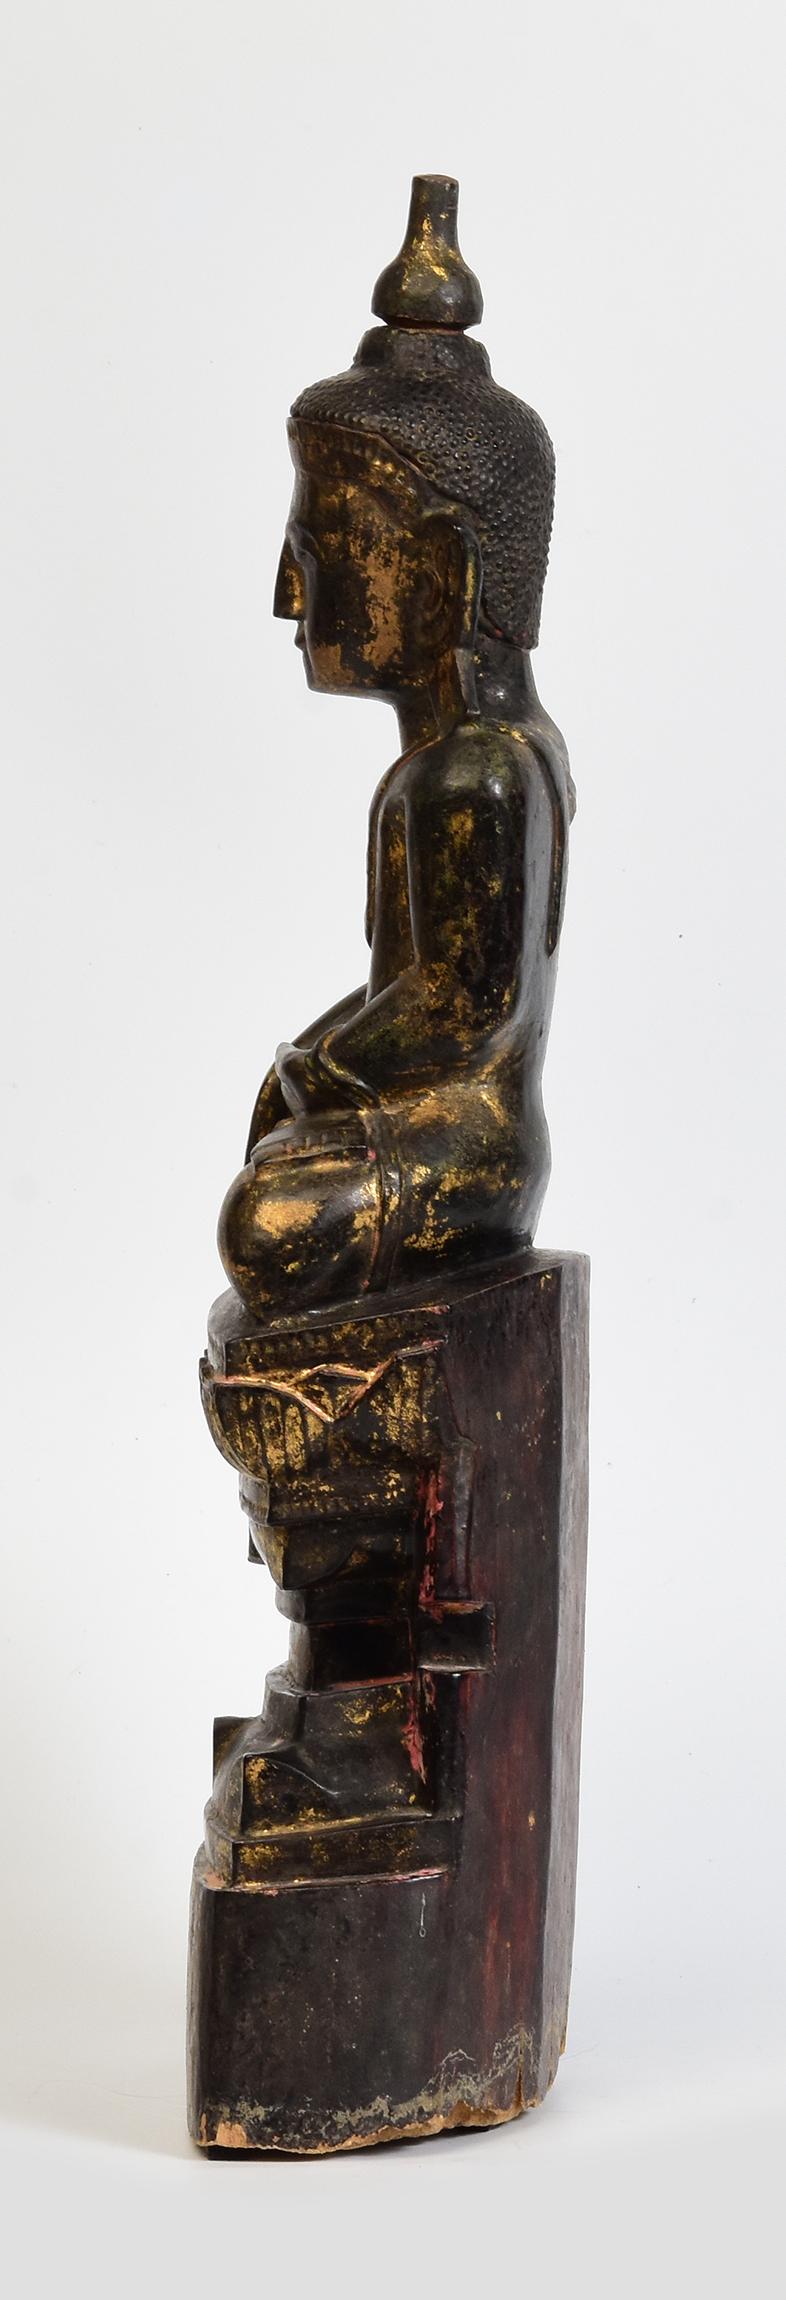 18th Century, Shan, Antique Burmese Wooden Seated Buddha For Sale 2